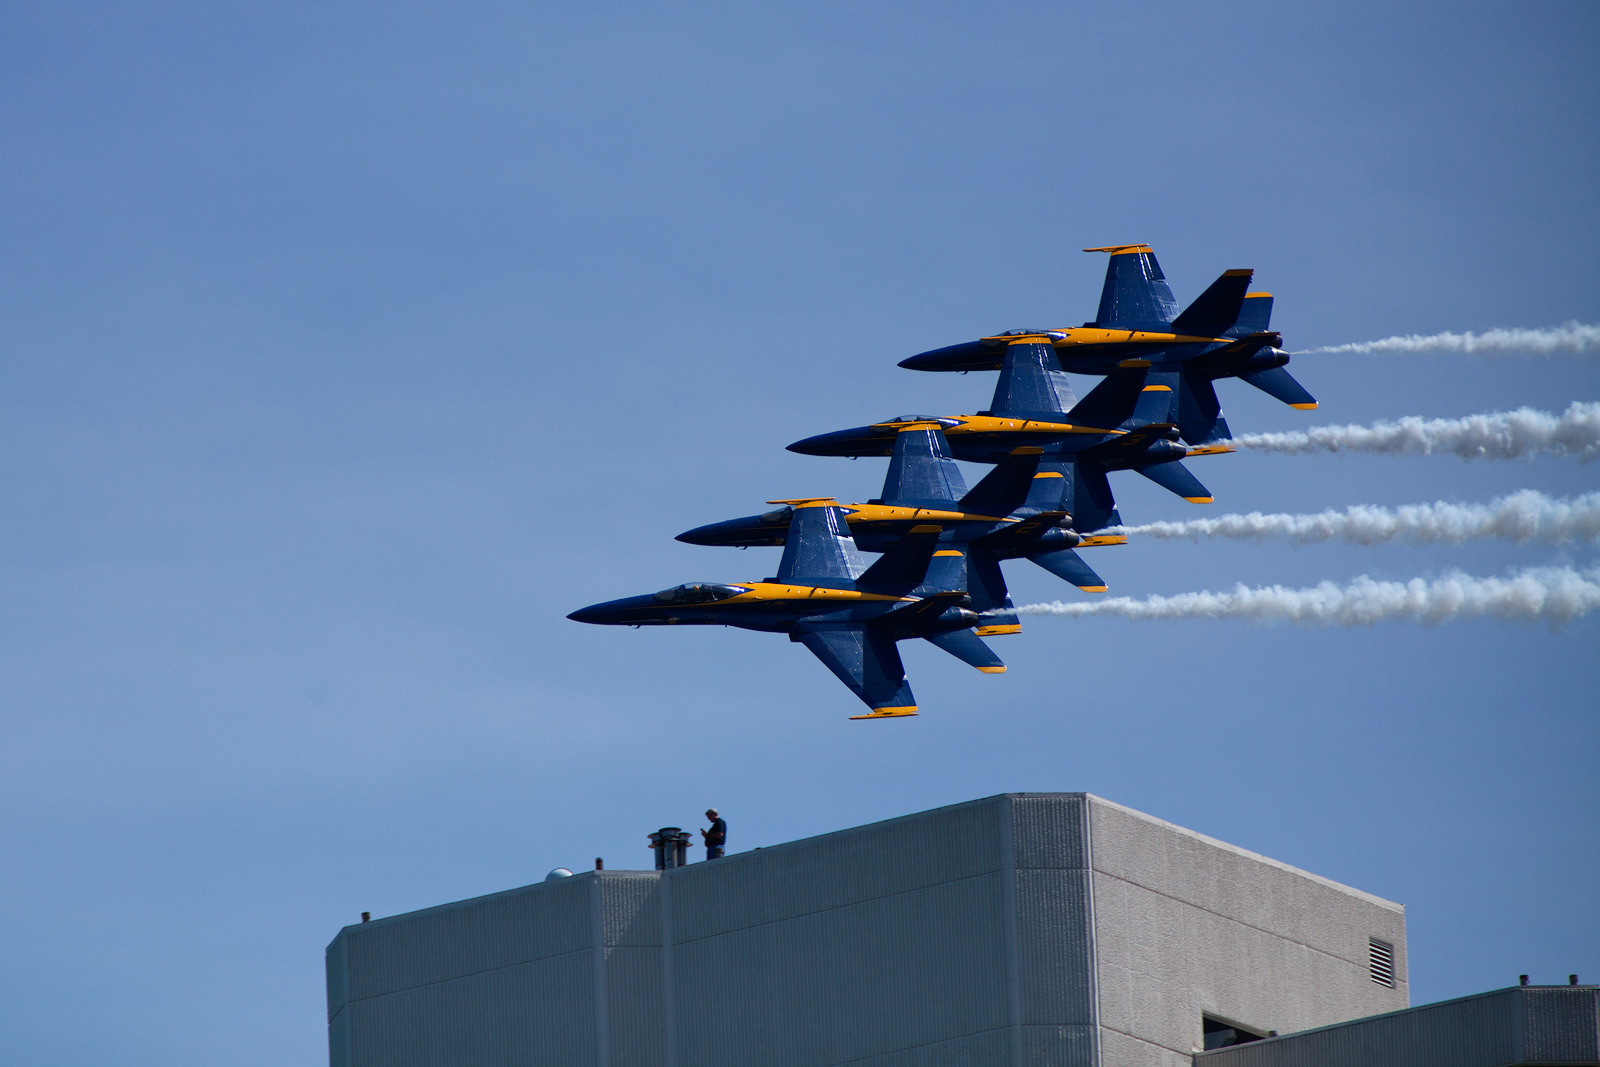 The Blue Angels flying a close pass to a roof worker who is temporarily oblivious to their presence.